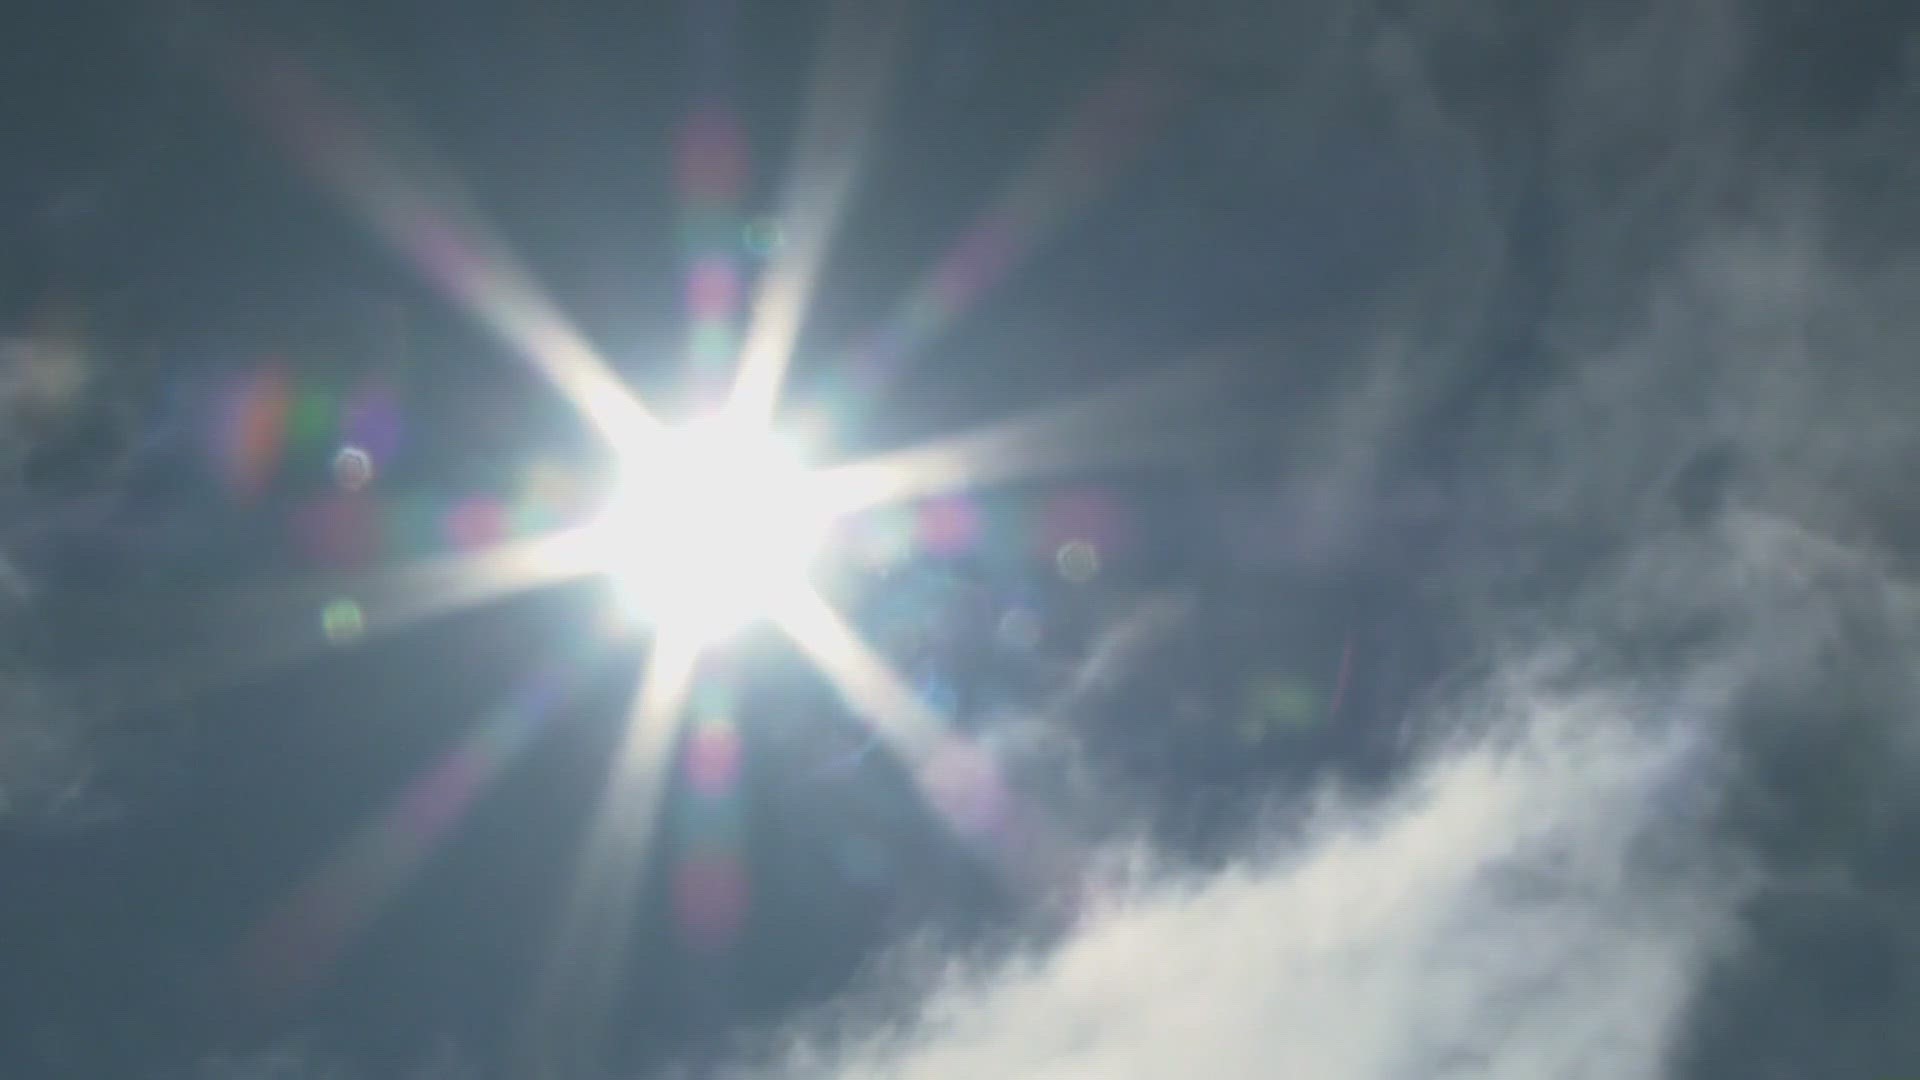 Mayor Cantrell announced an emergency declaration on Tuesday to deal with excessive heat currently plaguing the city this summer.